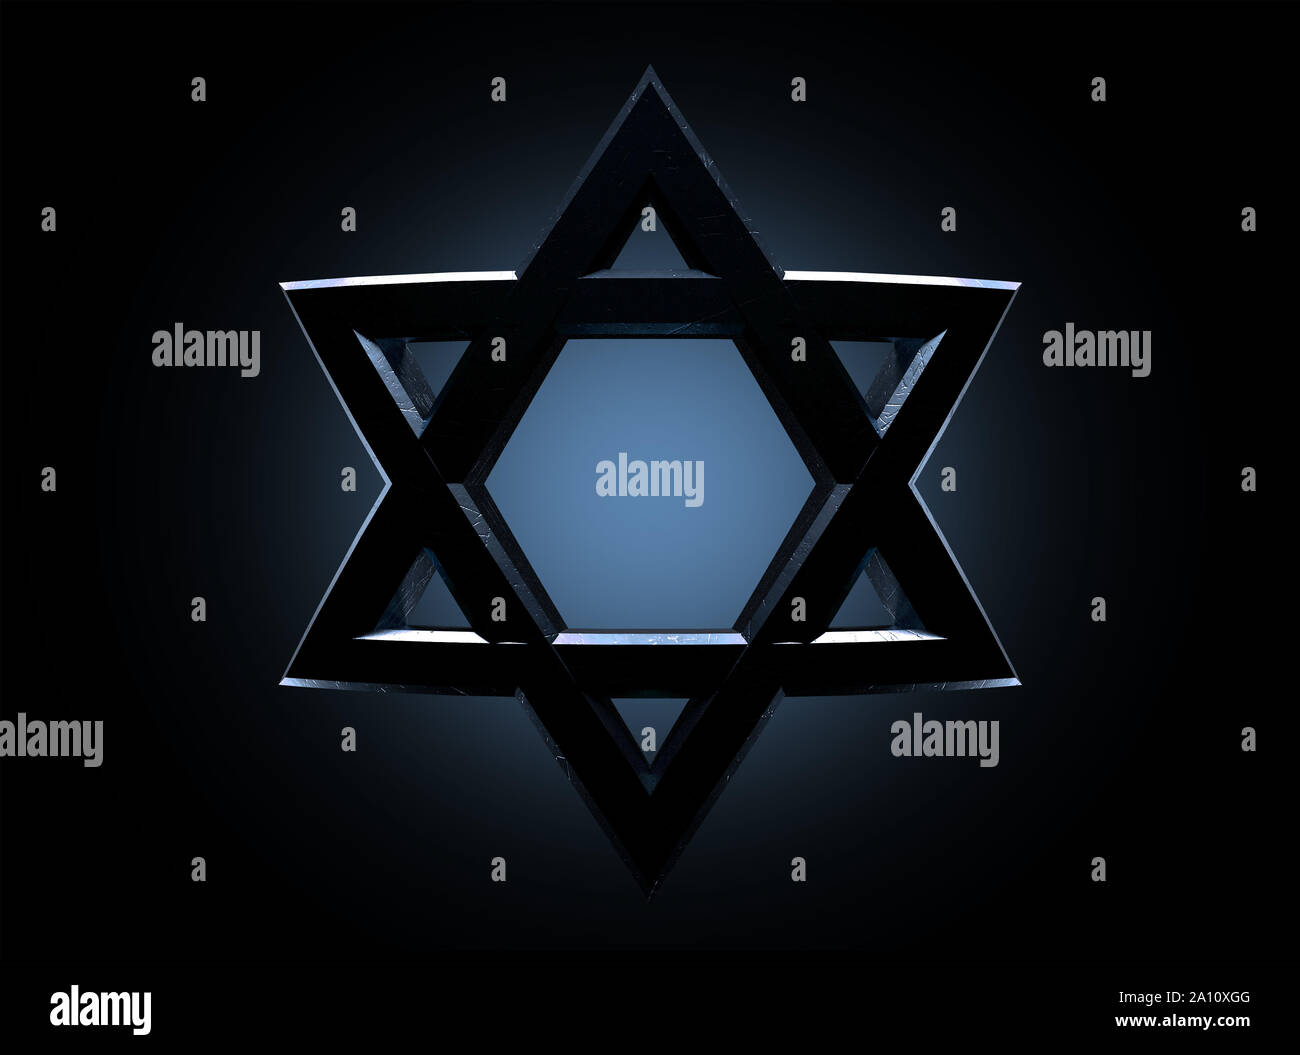 A dramatically backlit gold casting of the star of david on a dark background - 3D render Stock Photo